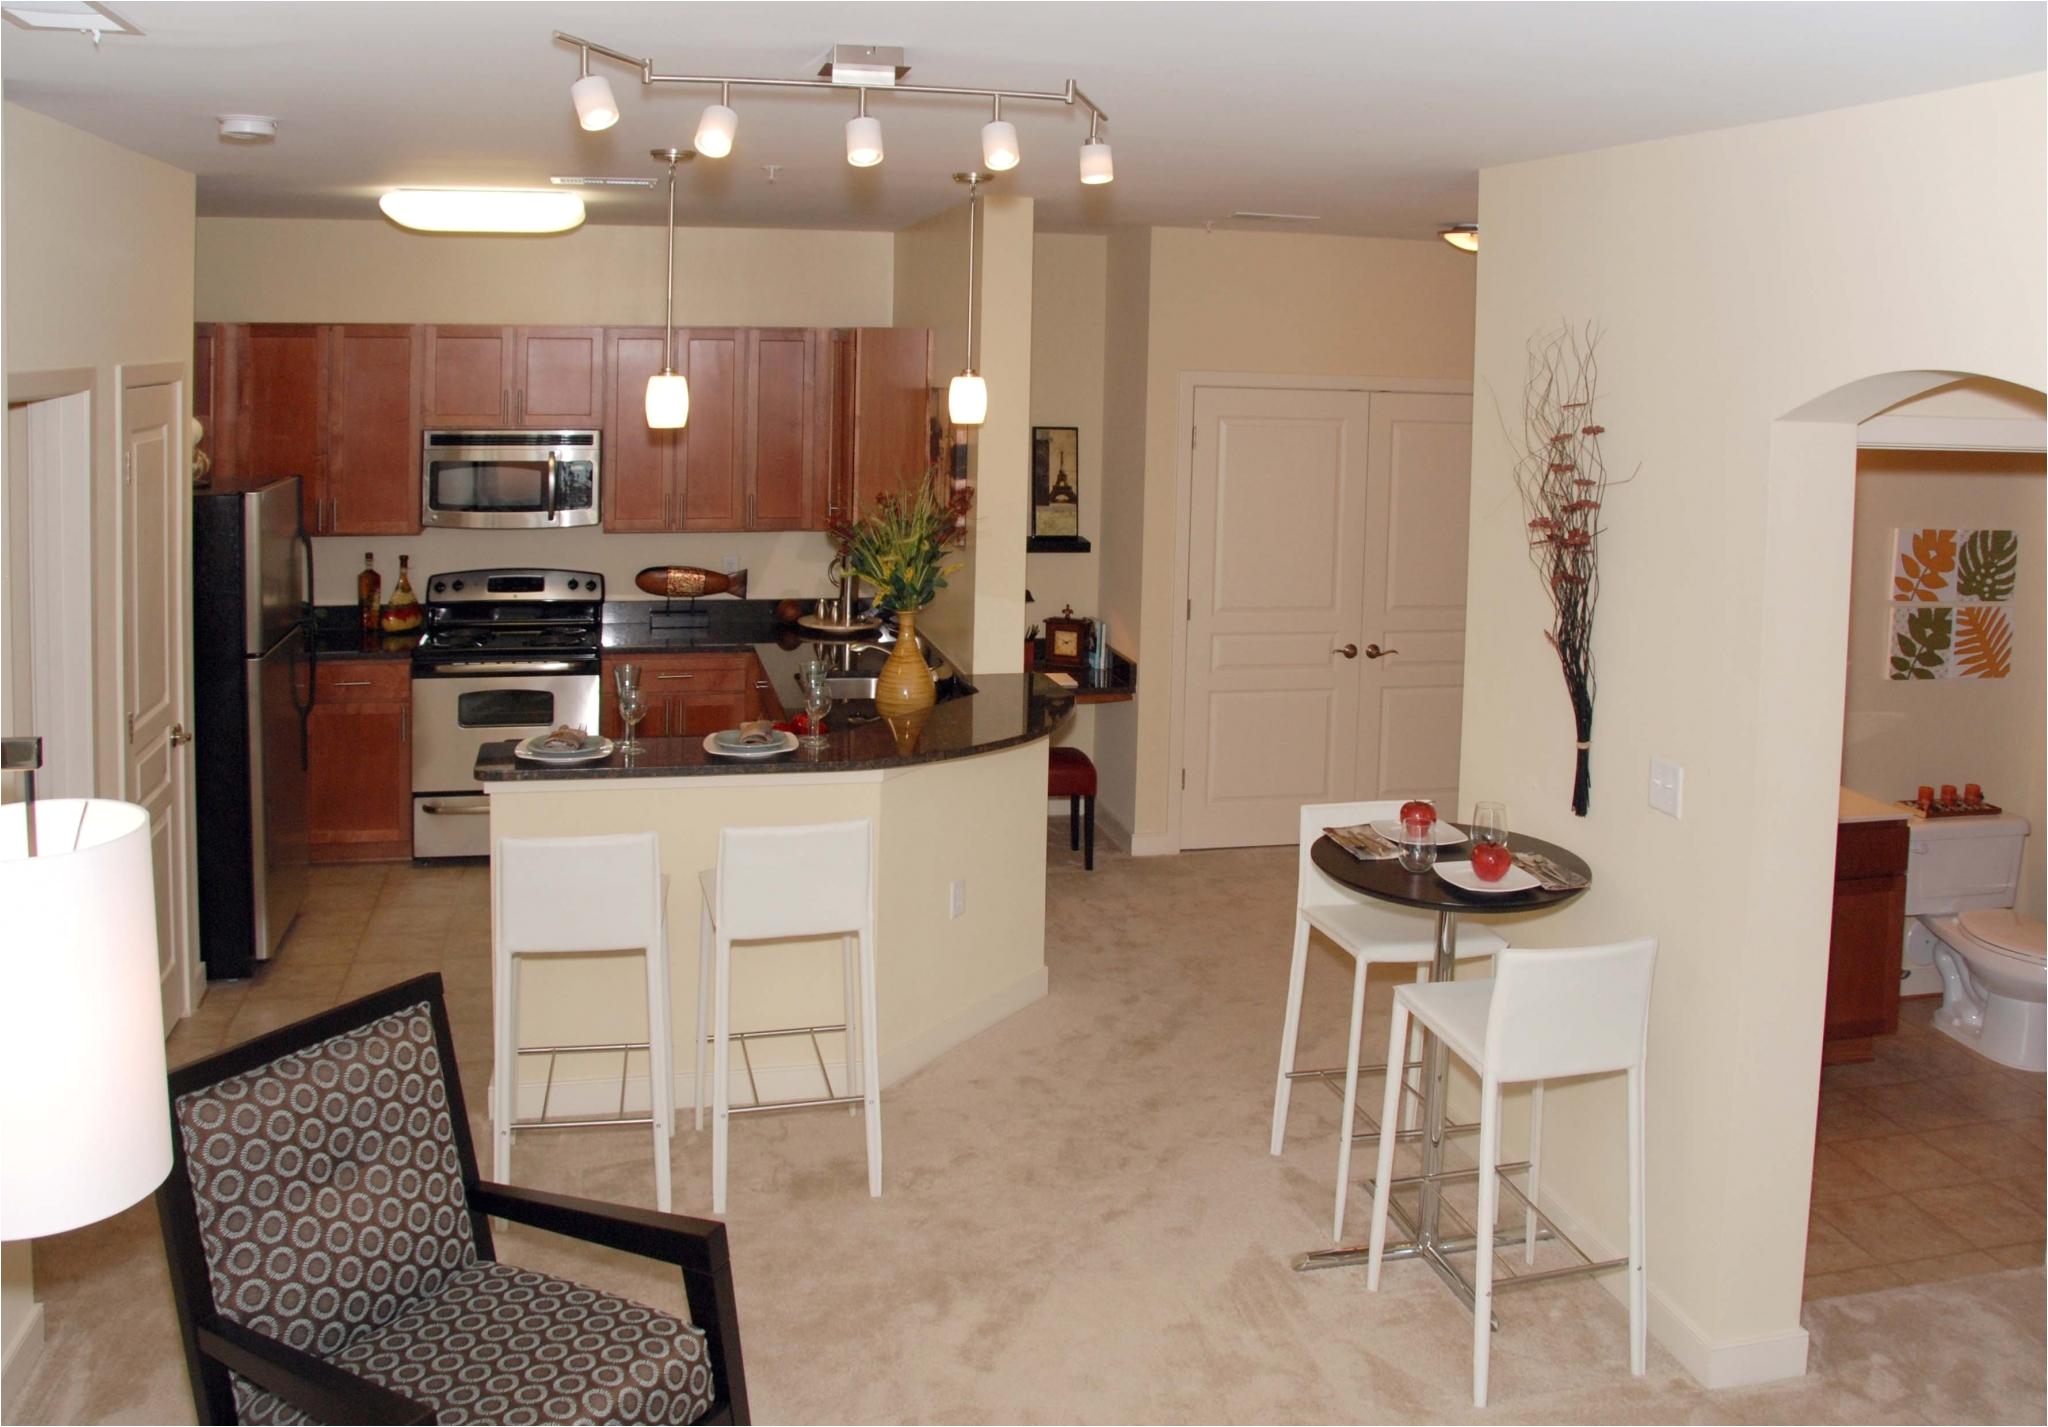 One Bedroom Apartments for Rent In Virginia Beach Va Apartments In Chesapeake with Utilities Included Section Opening